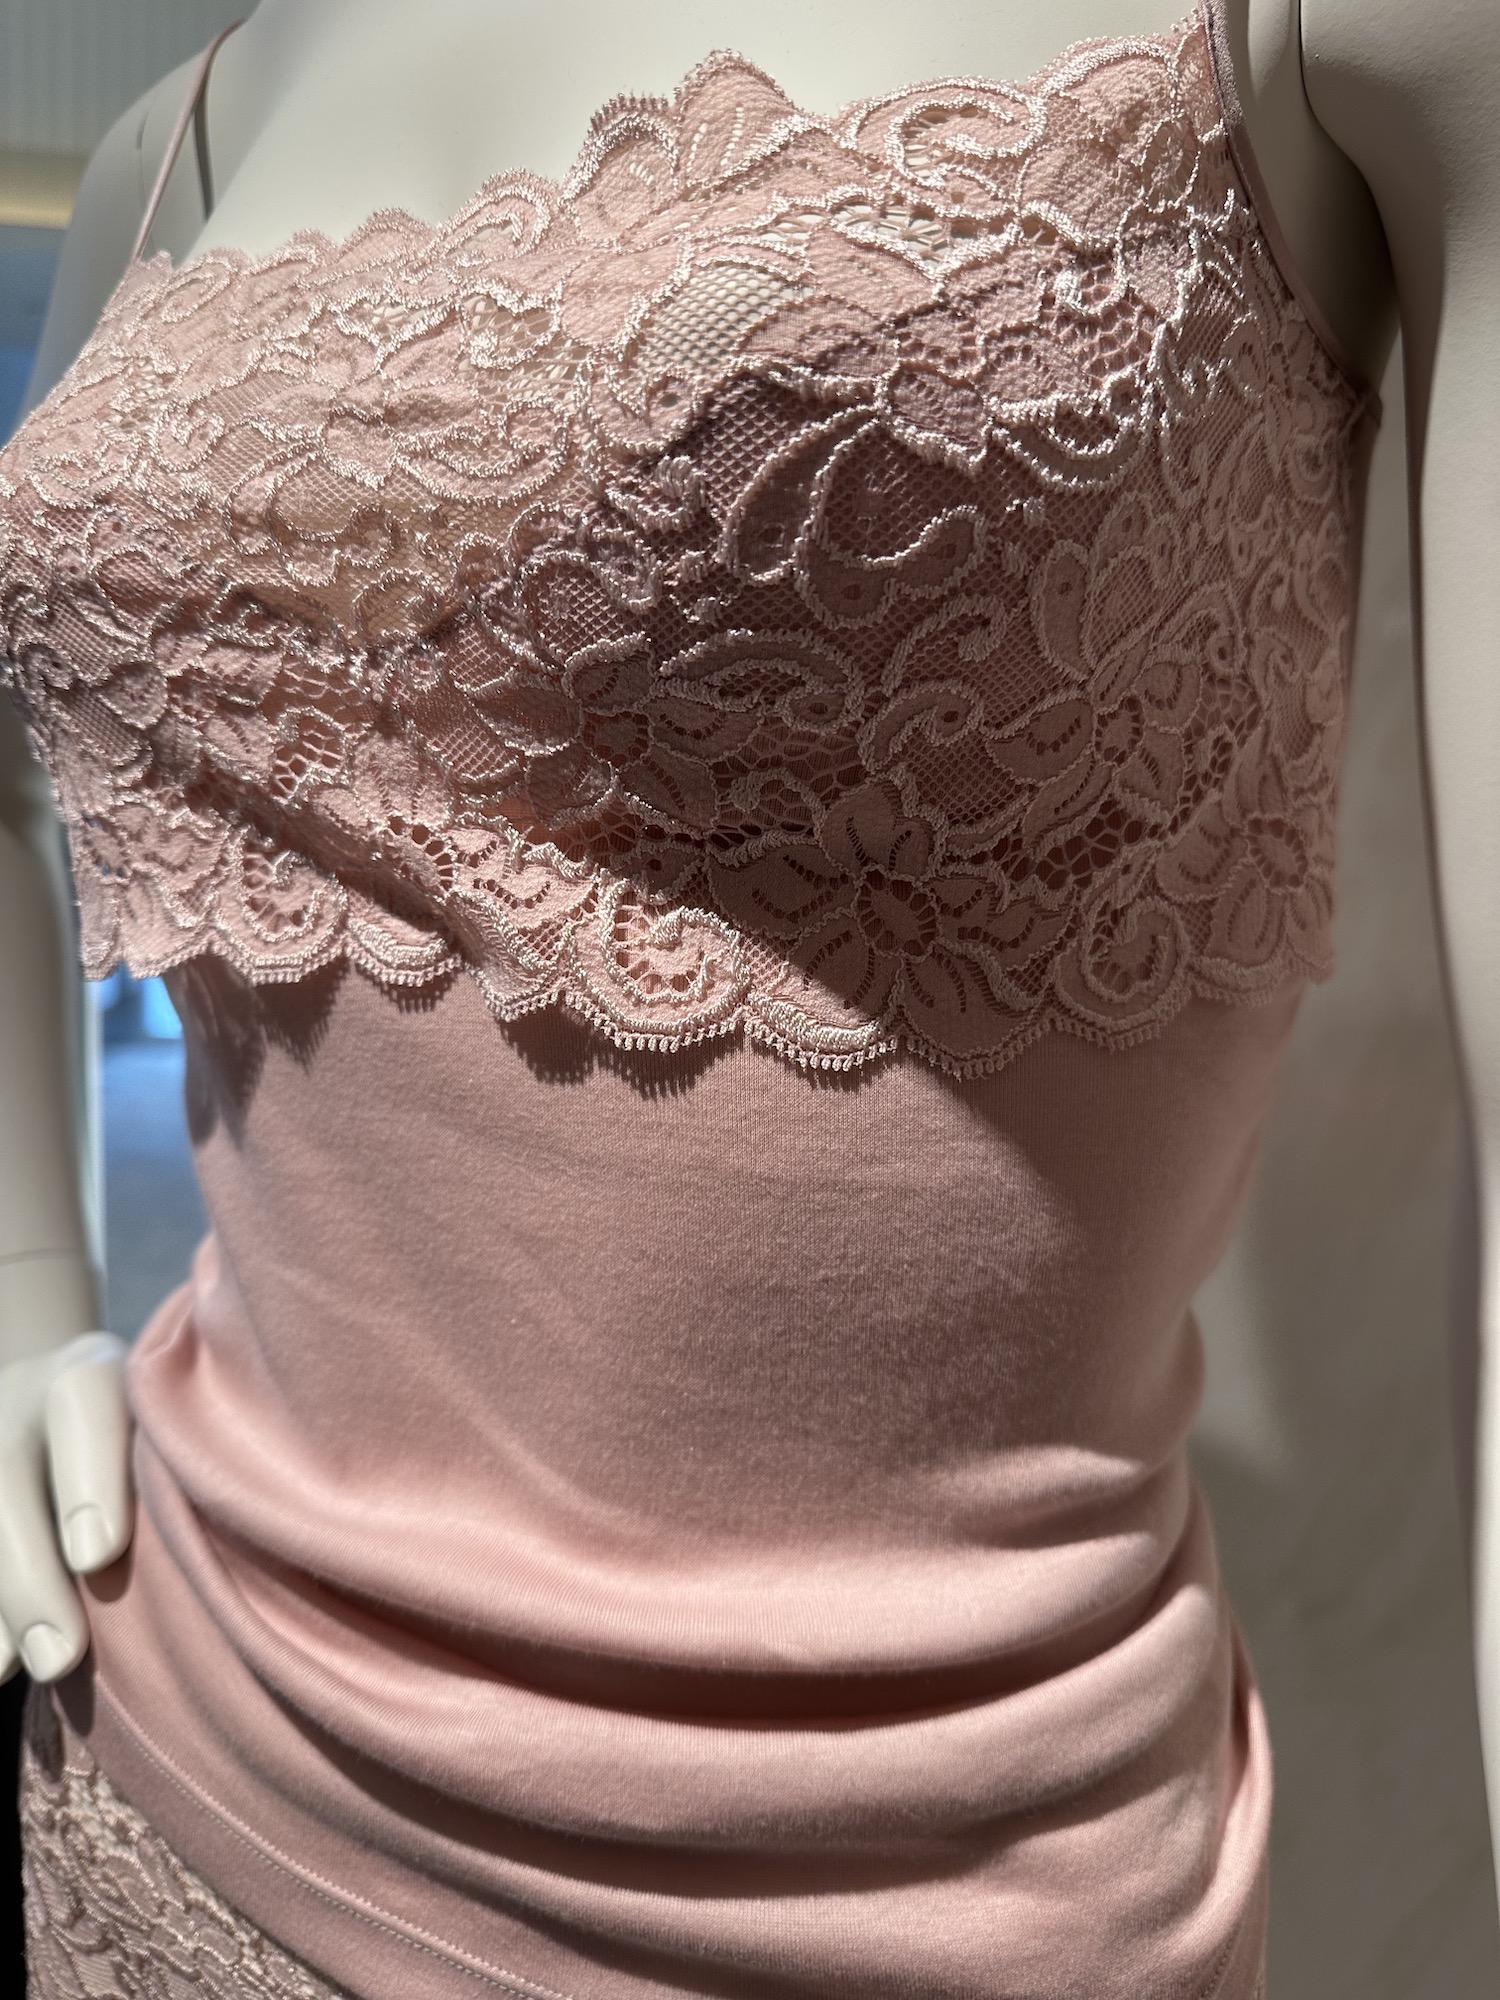 Luxe lingerie brand HANRO launches at Harrods